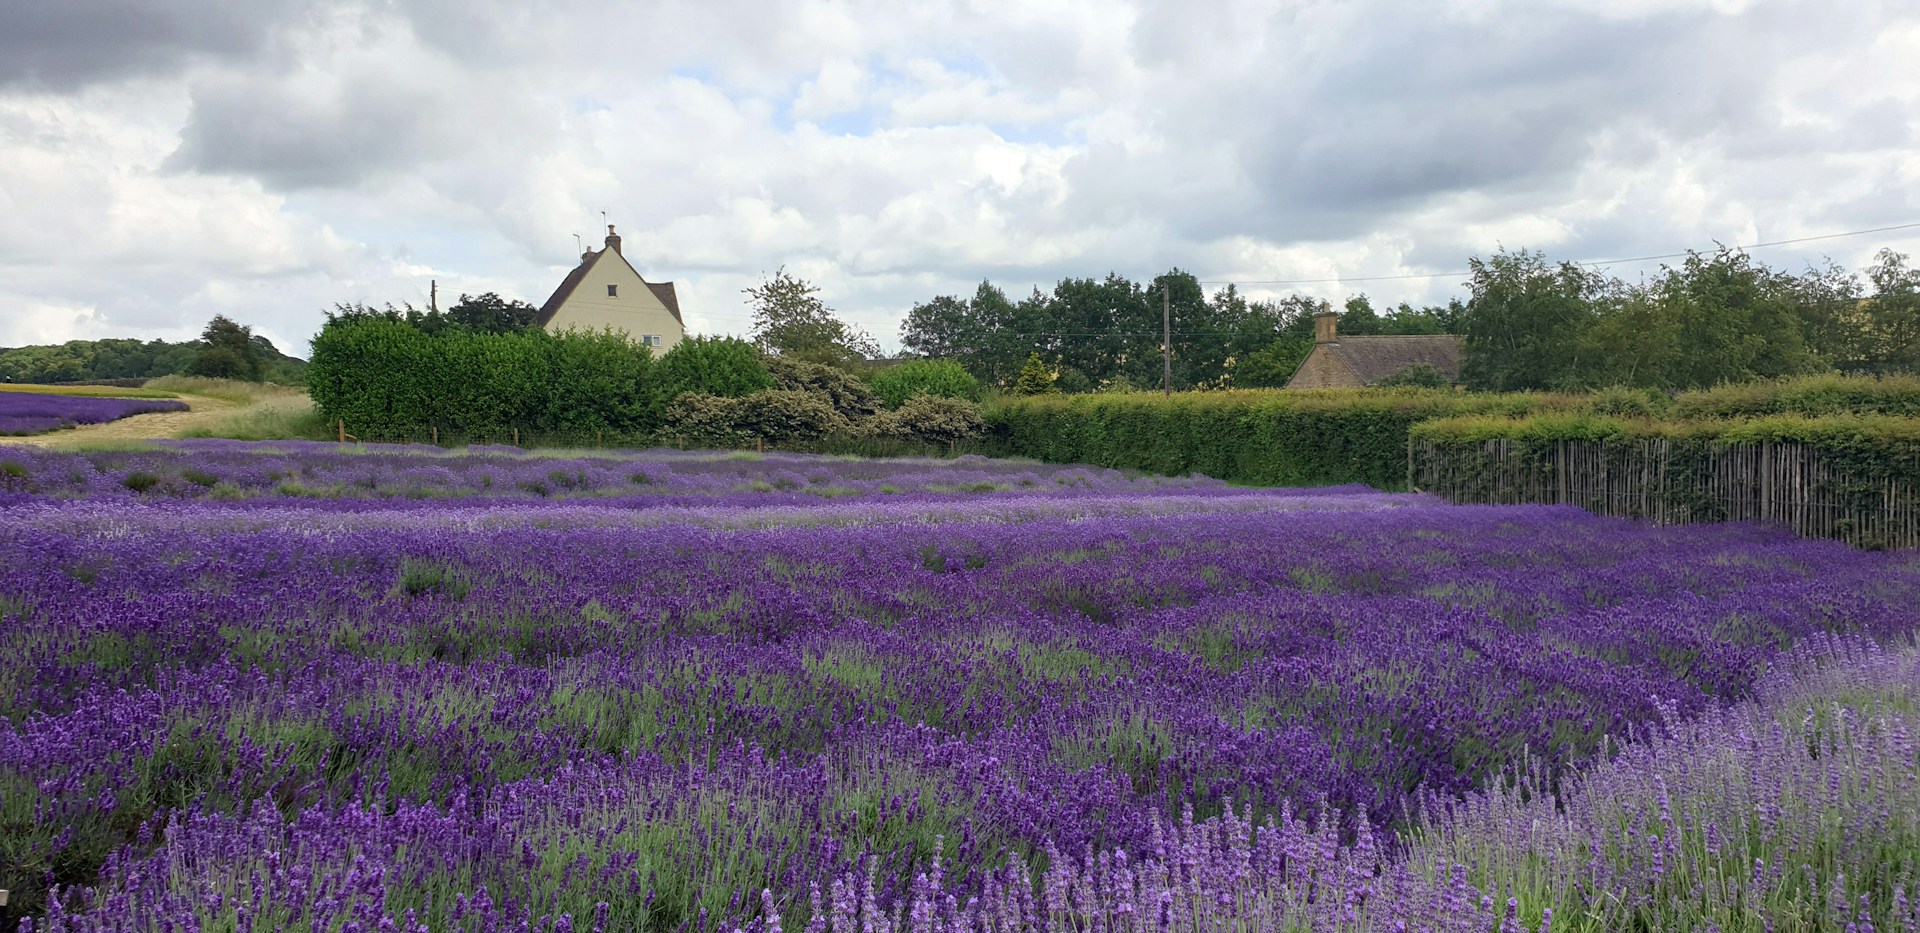 Snowshill Lavender Fields Taxi